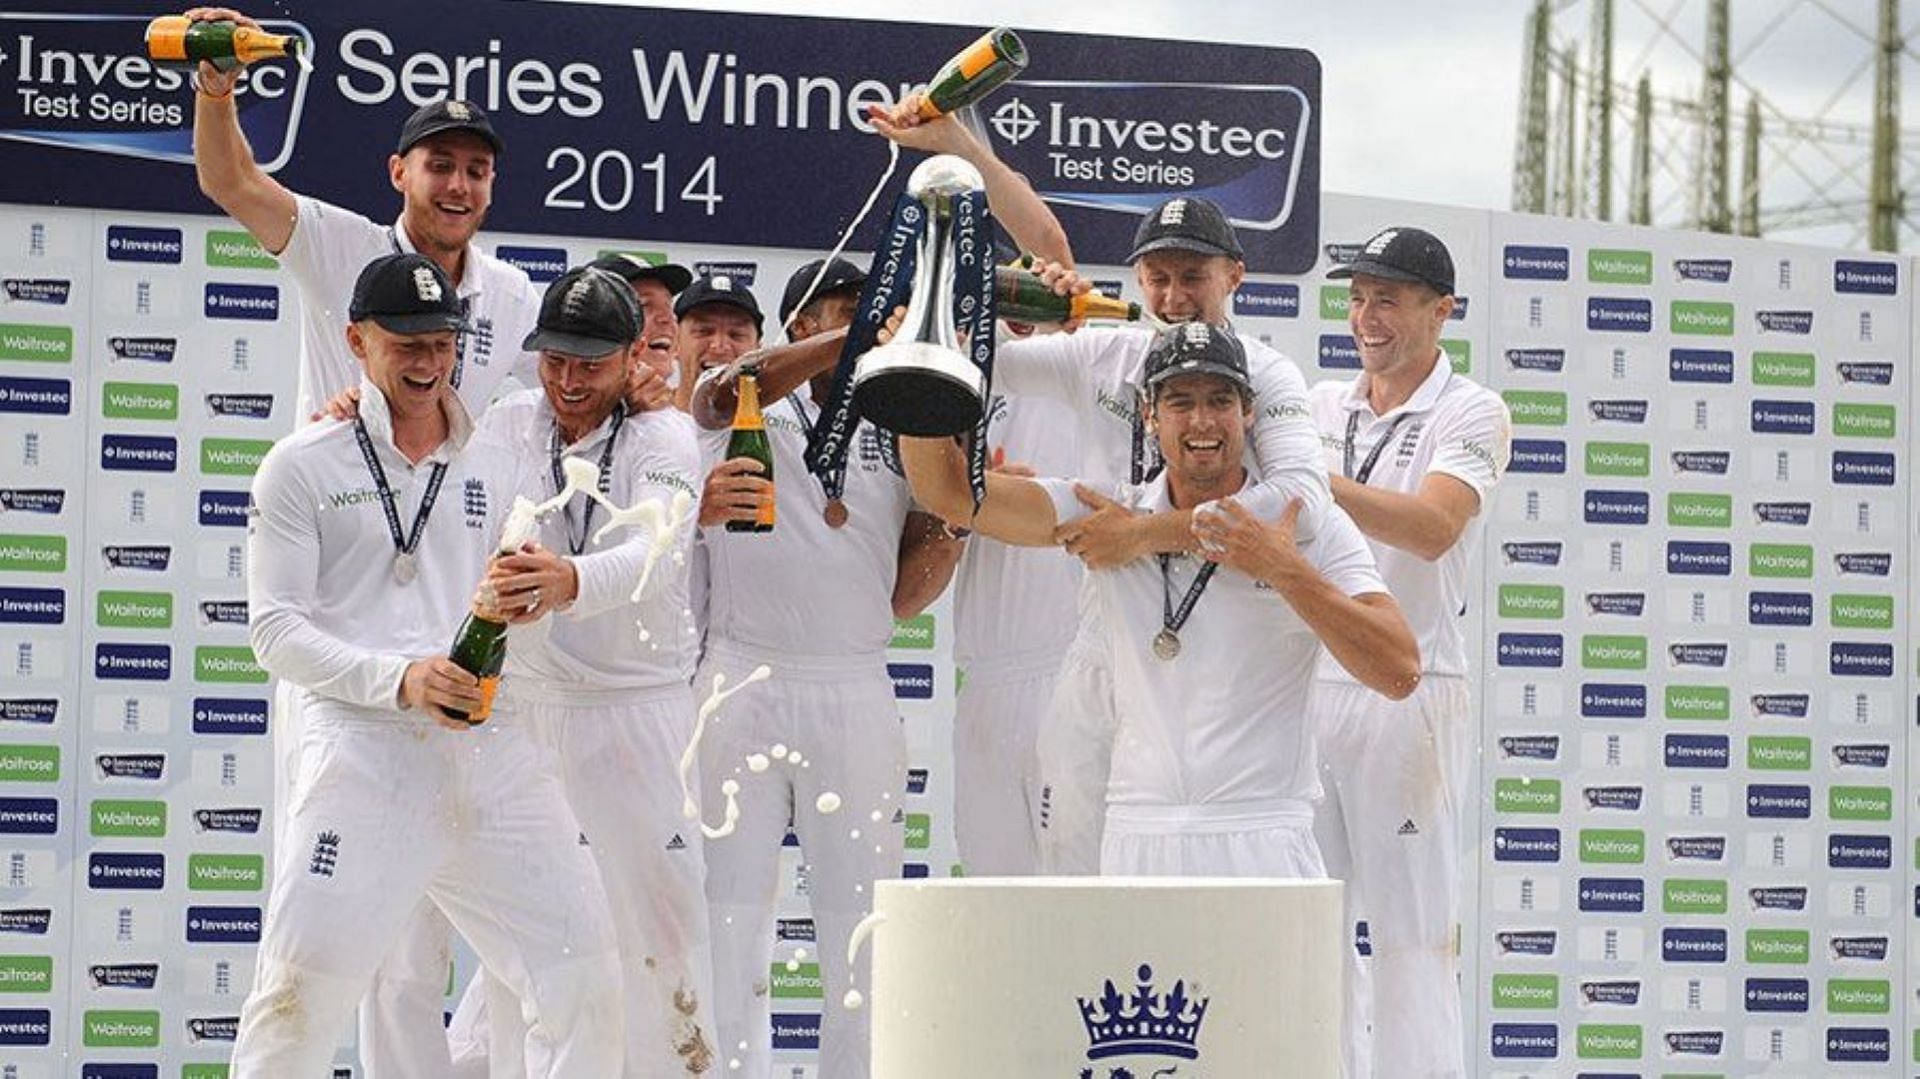 England dominated the final three Tests to win the series against India.